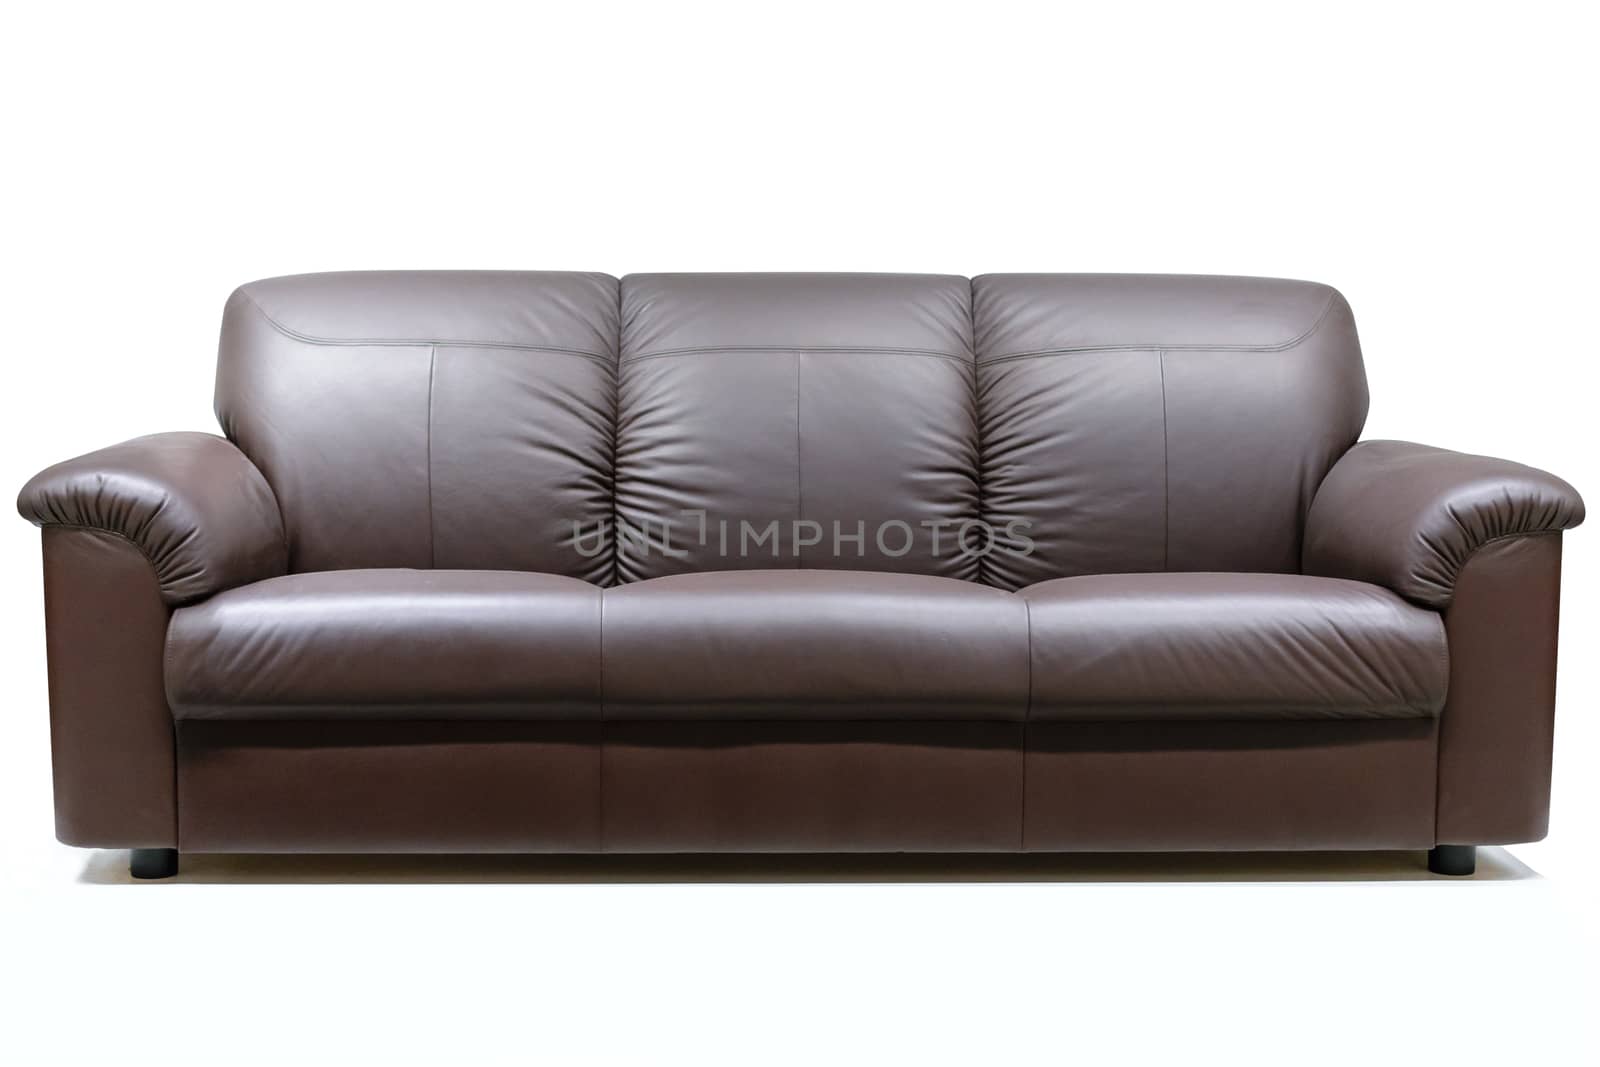 Brown and luxury leather sofa on a white background